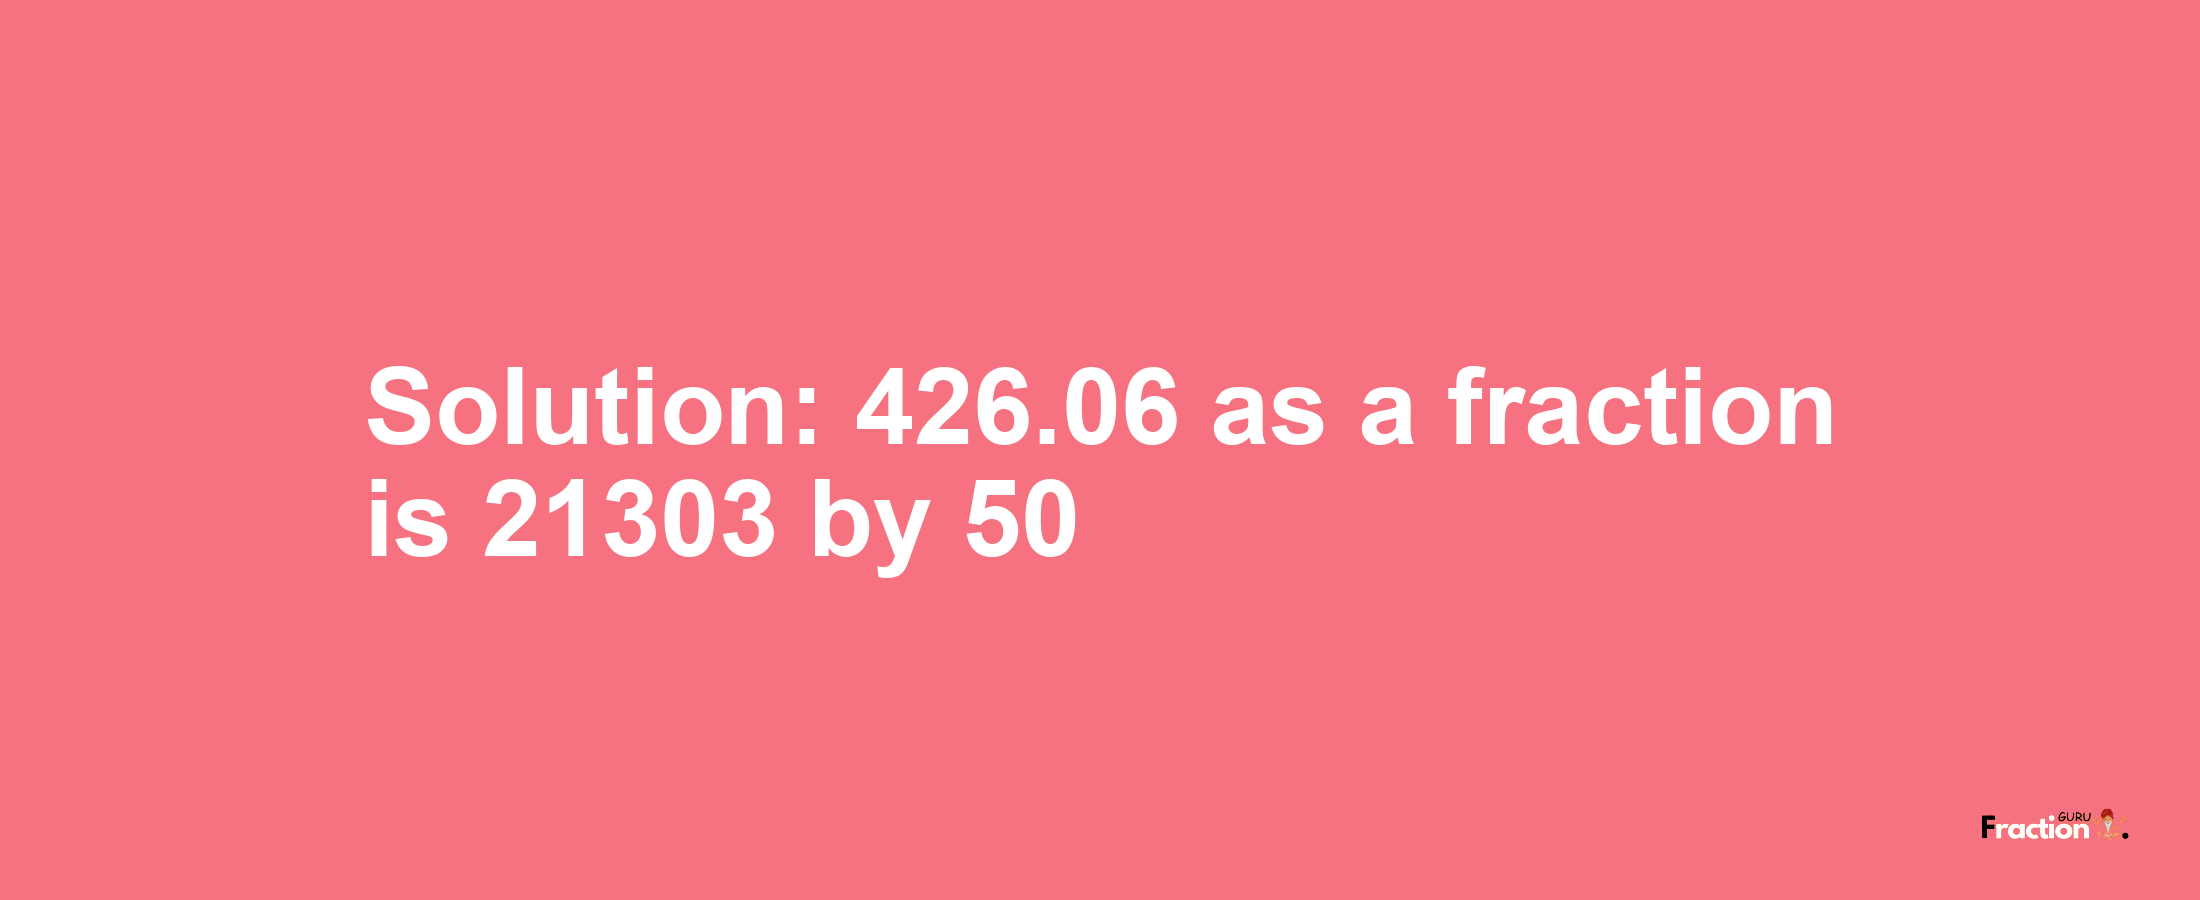 Solution:426.06 as a fraction is 21303/50